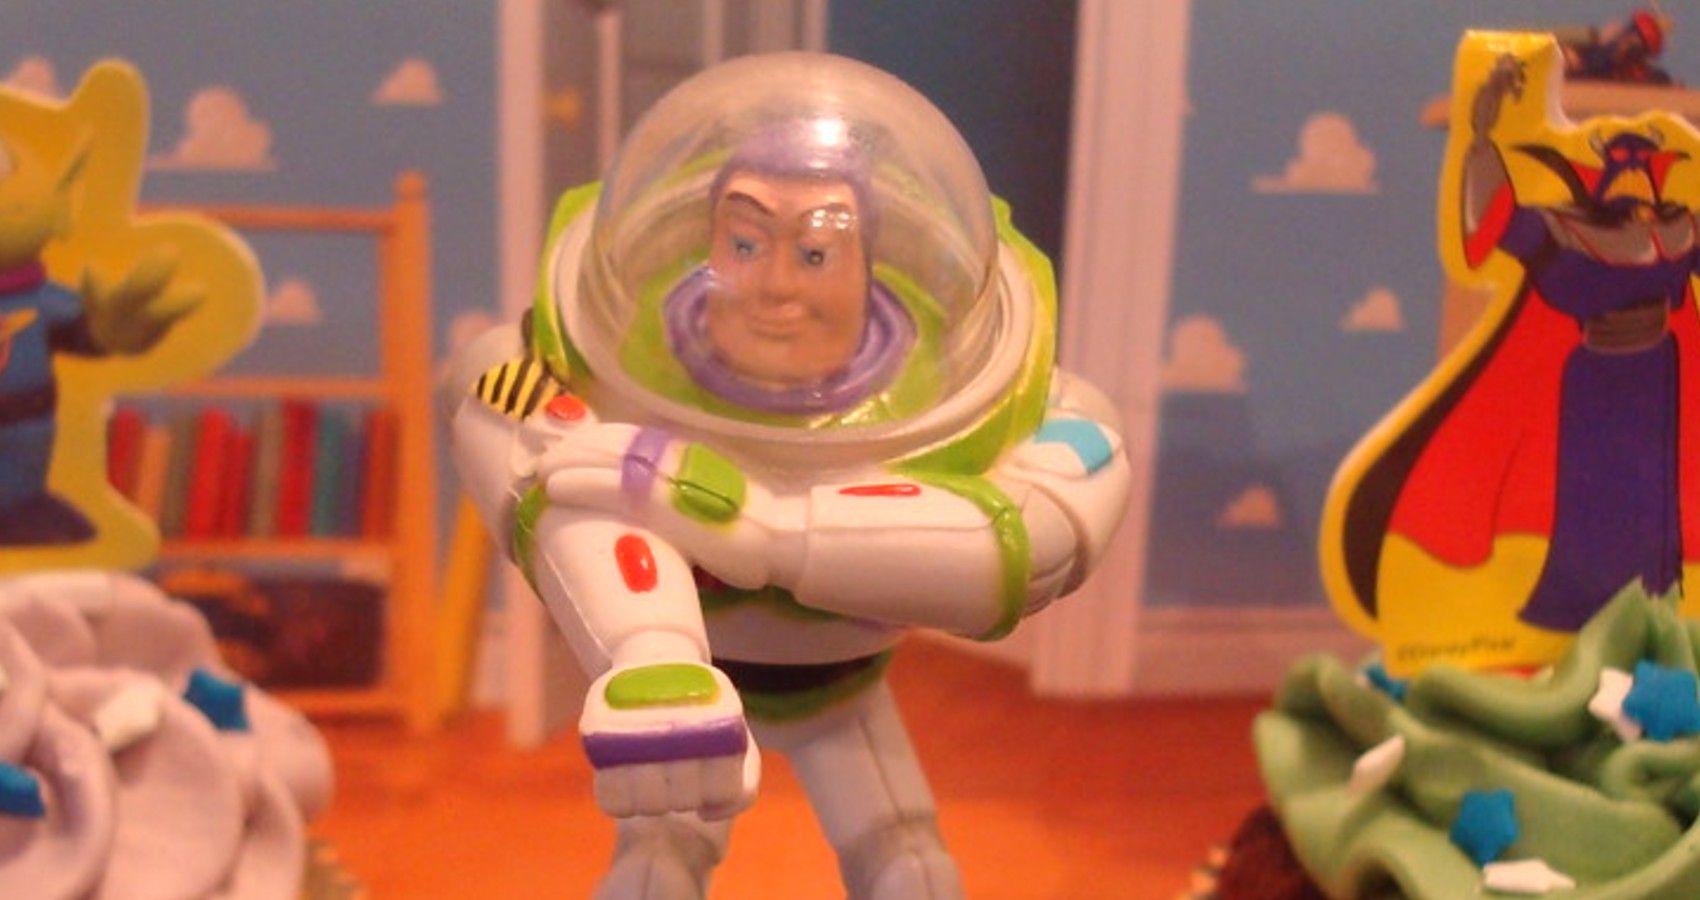 Pixar Aiming For More Inclusion As They Reinstate Deleted LGBTQ Moment In 'Lightyear' 